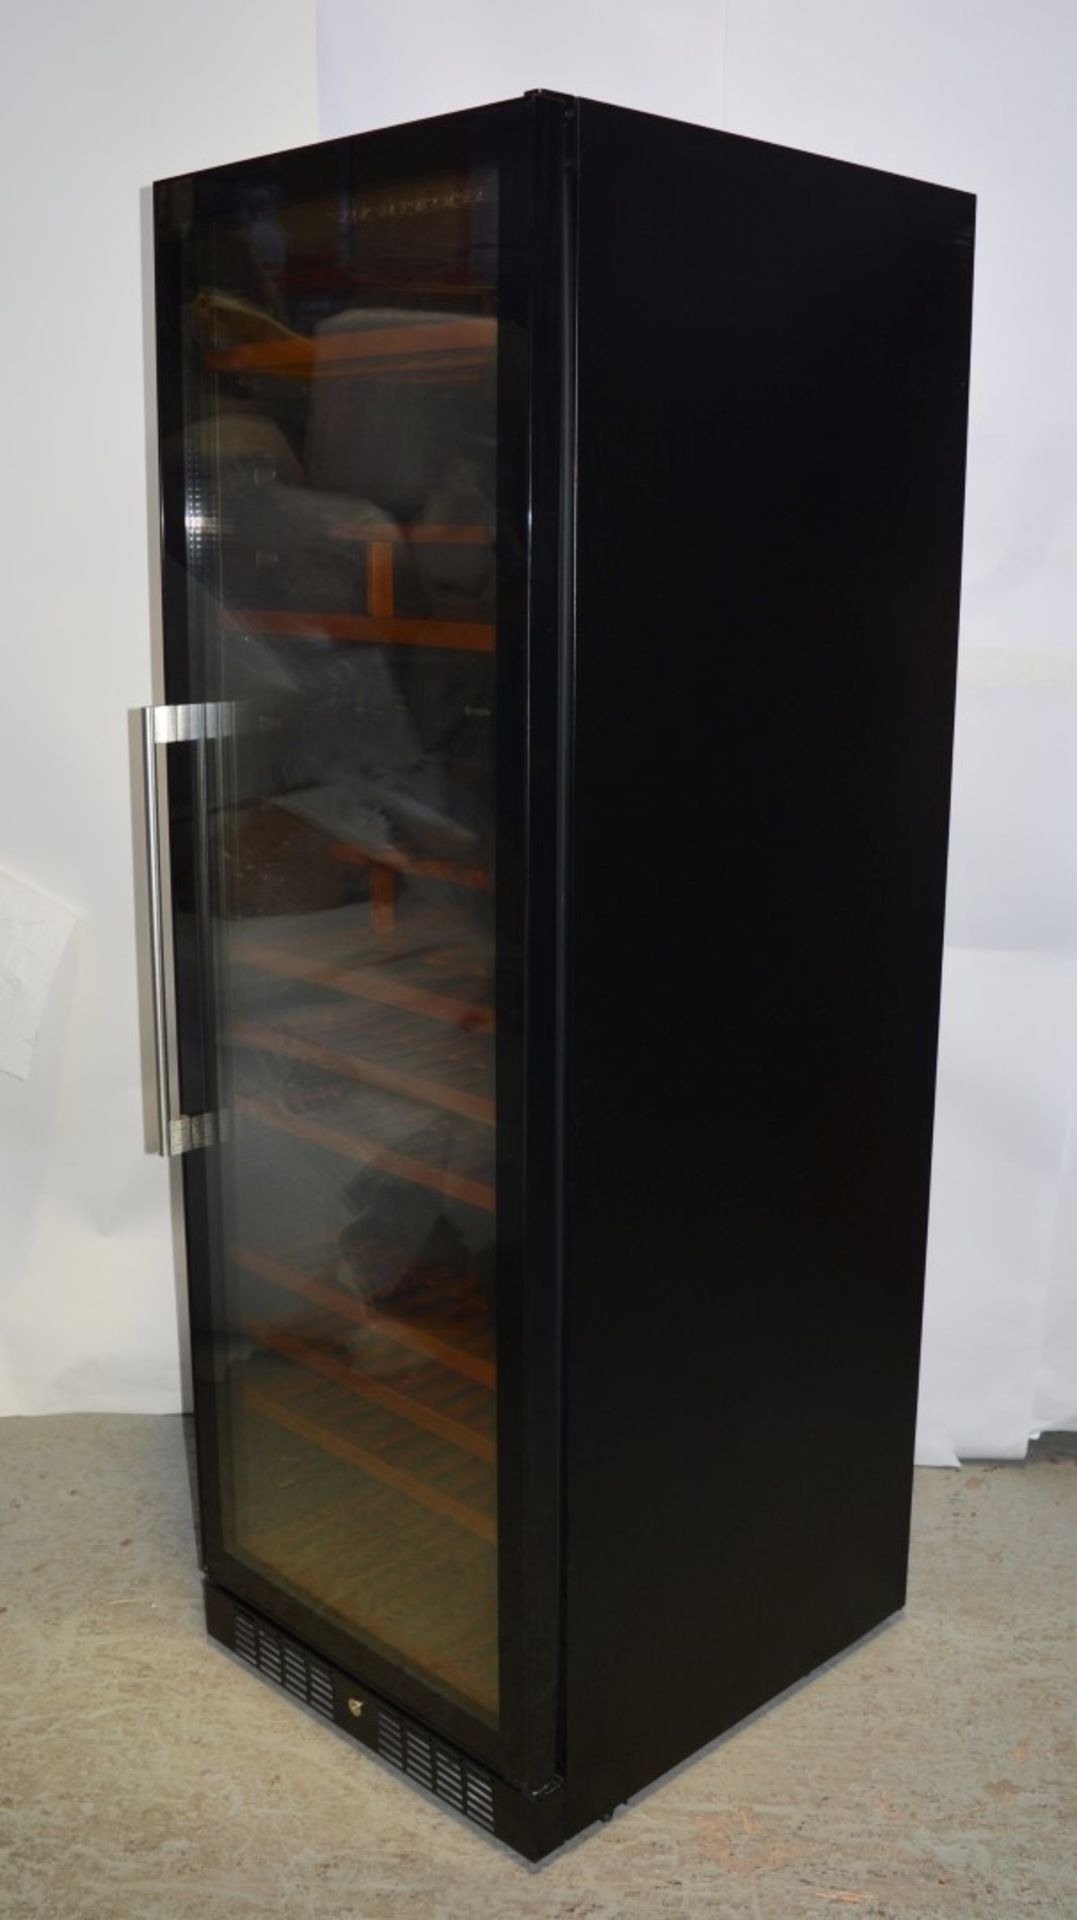 1 x Caple Freestanding Wine Chiller Cabinet - Model WF1547 - Height 176cm - Features Black Glass - Image 3 of 18